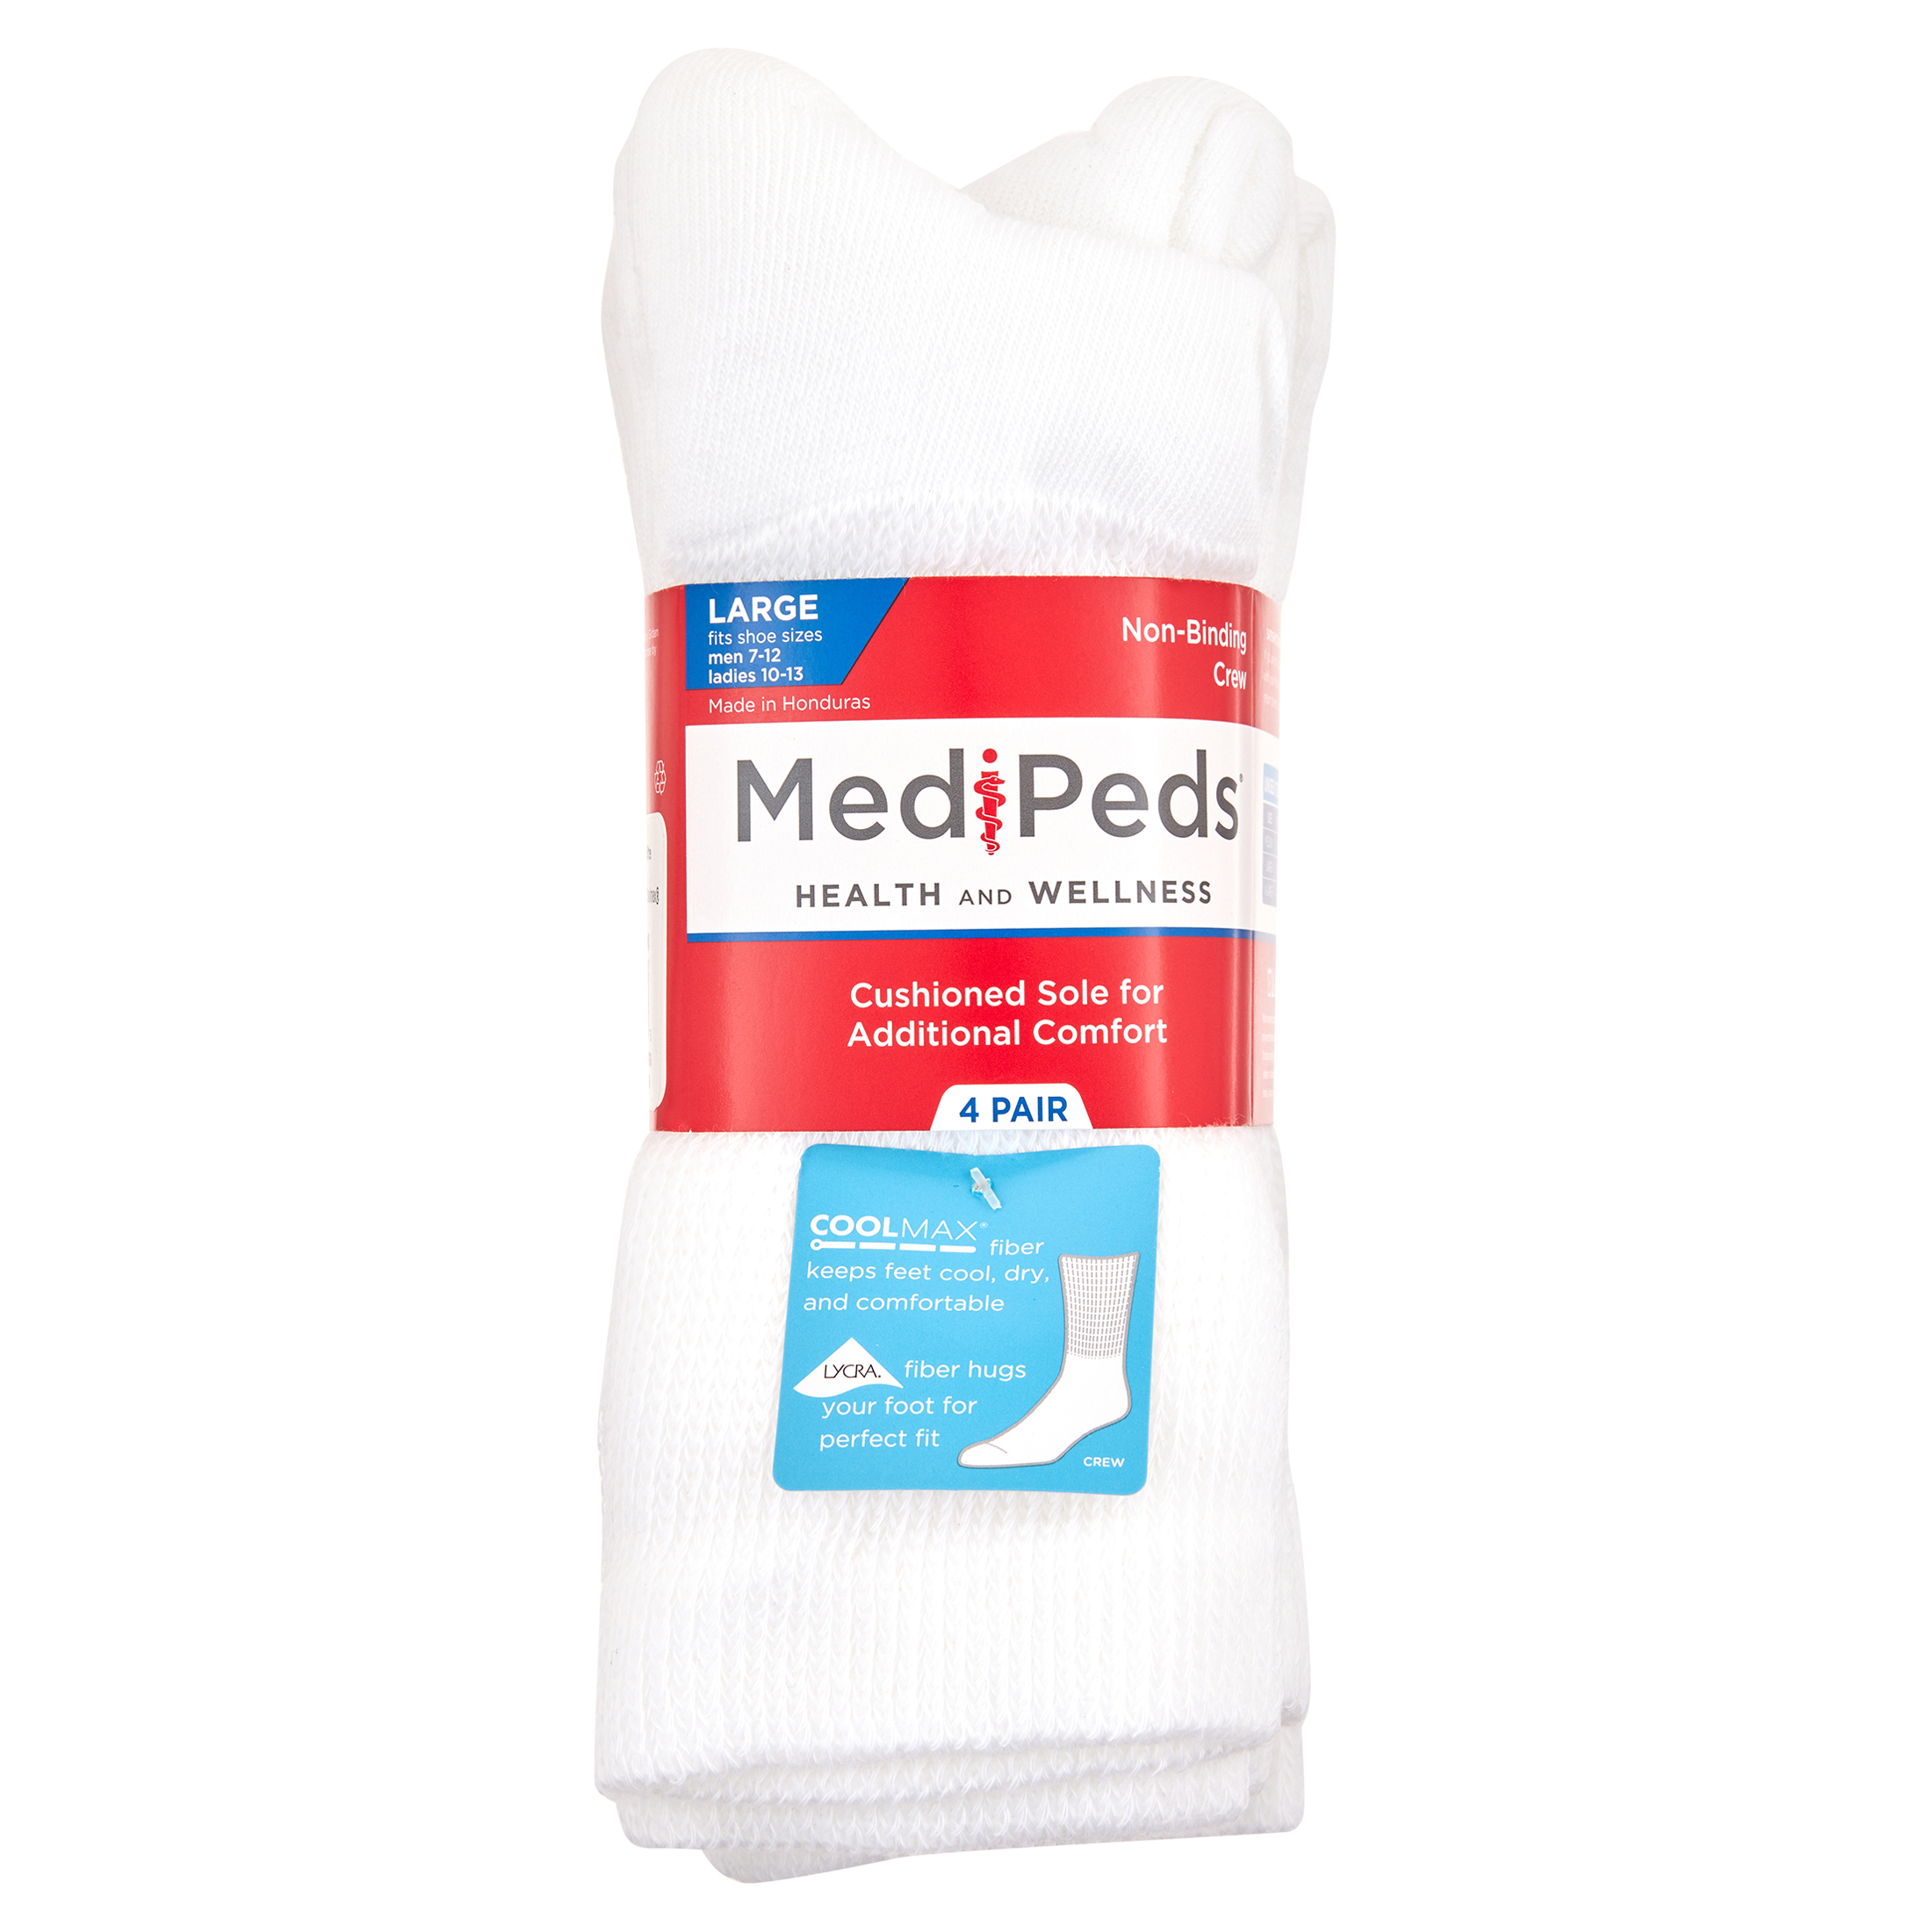 MediPeds Diabetic Crew Casual Socks with Non-Binding Top, Large, 4 Pack ...